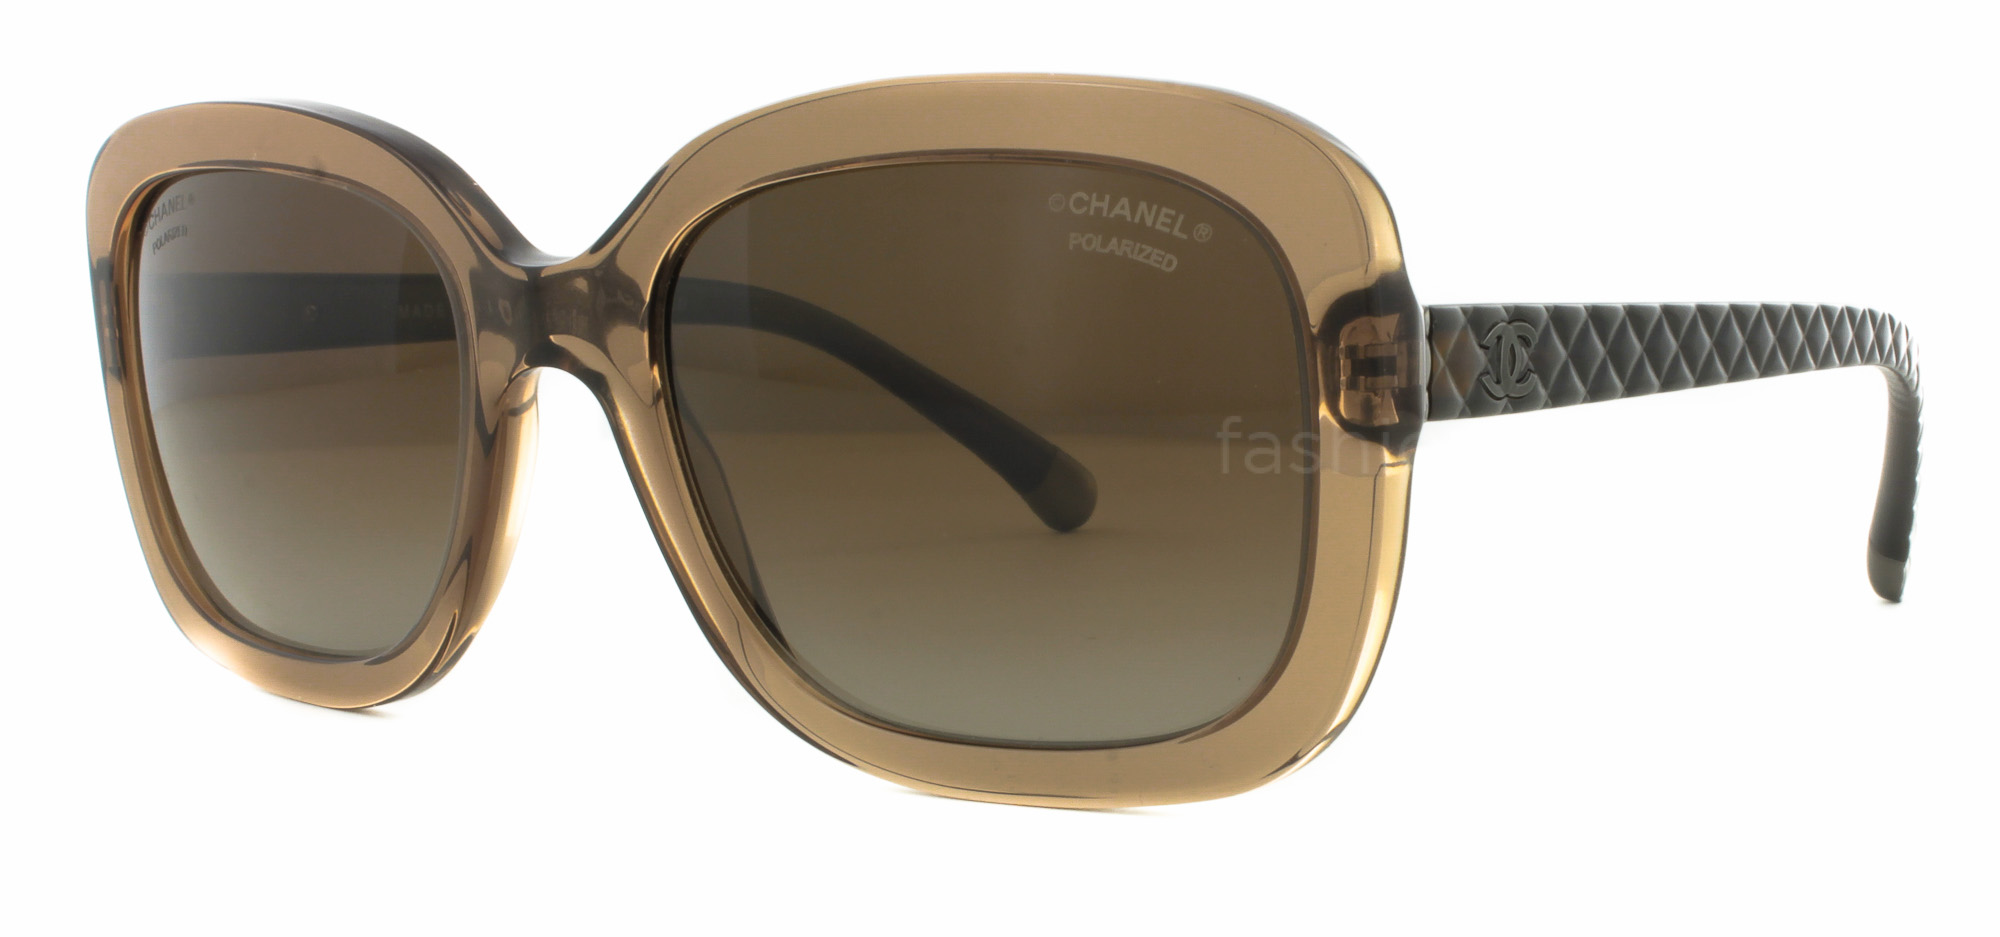 CHANEL 5329 1529S9